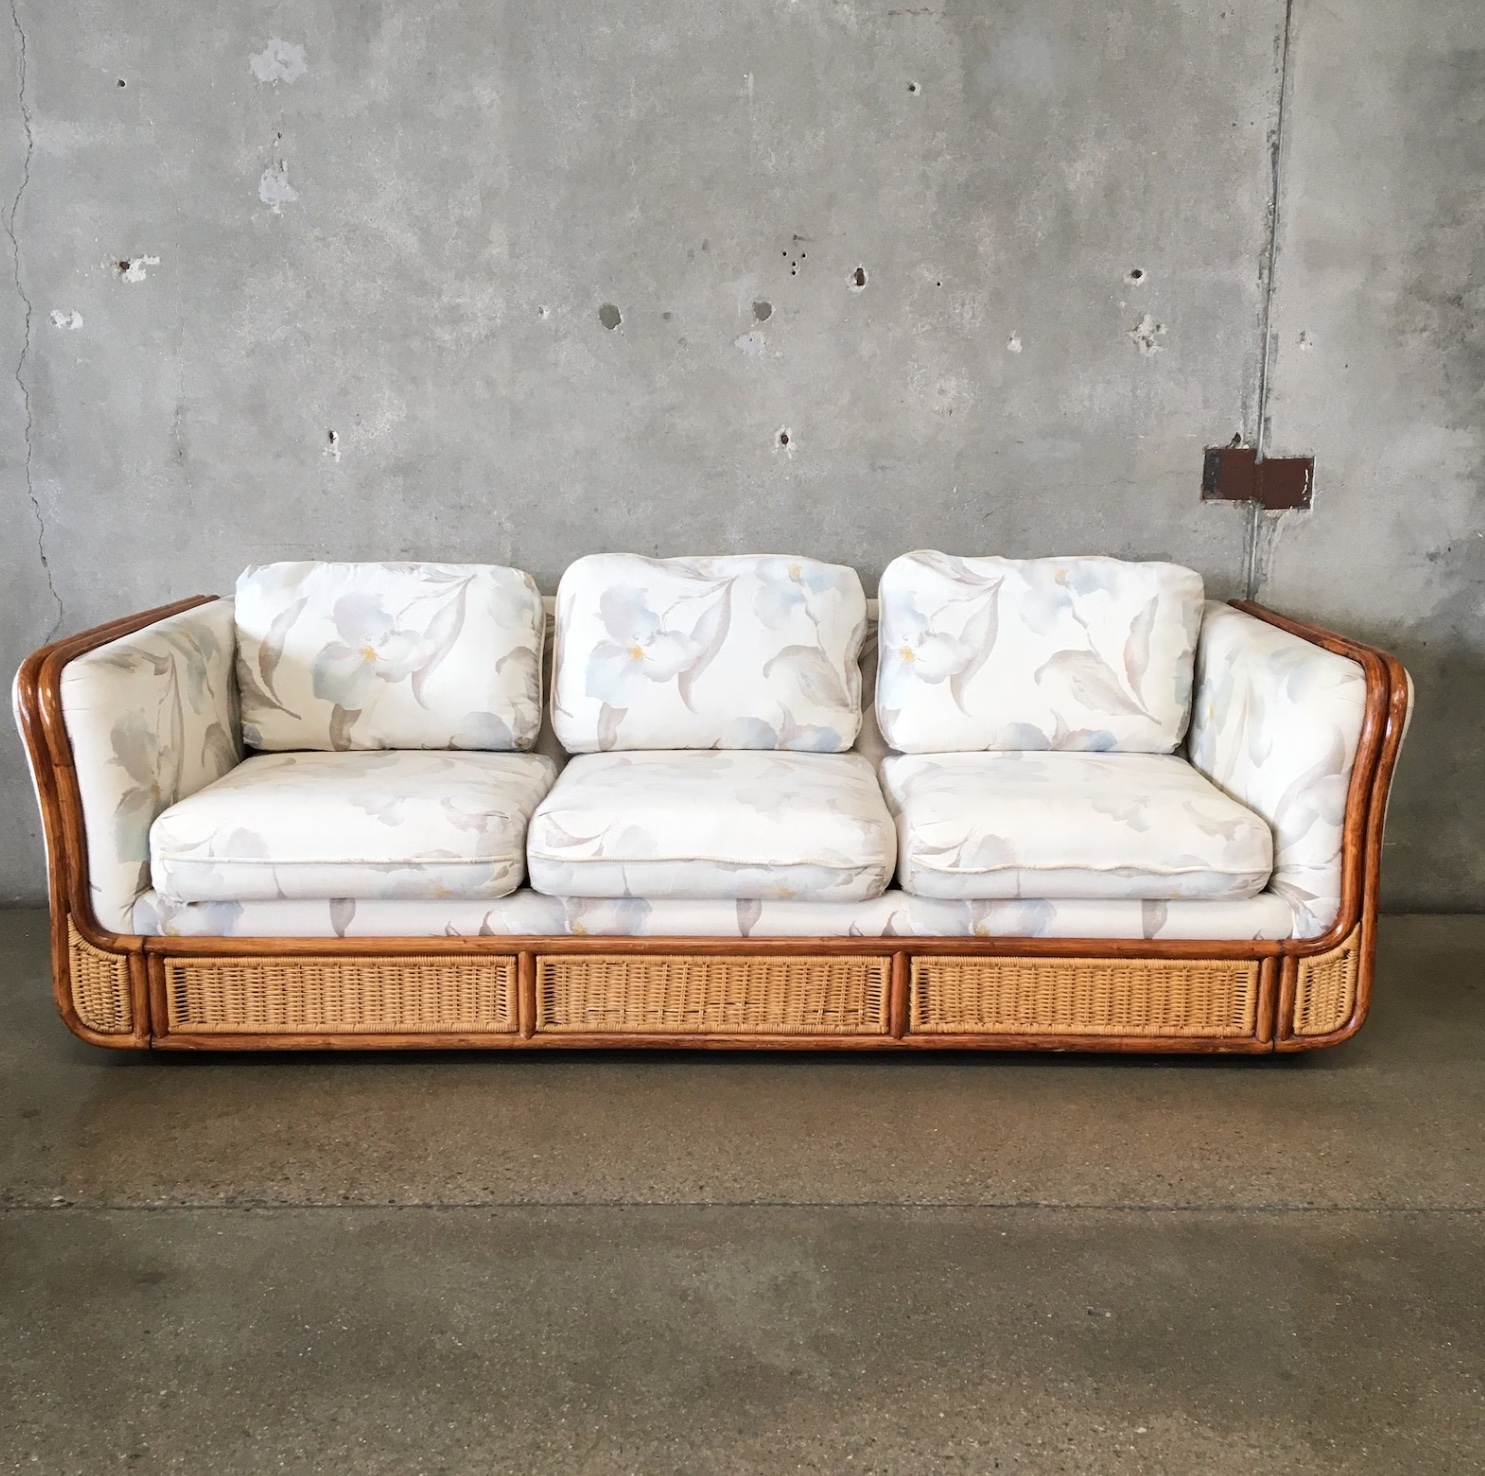 An Etsy couch listing.